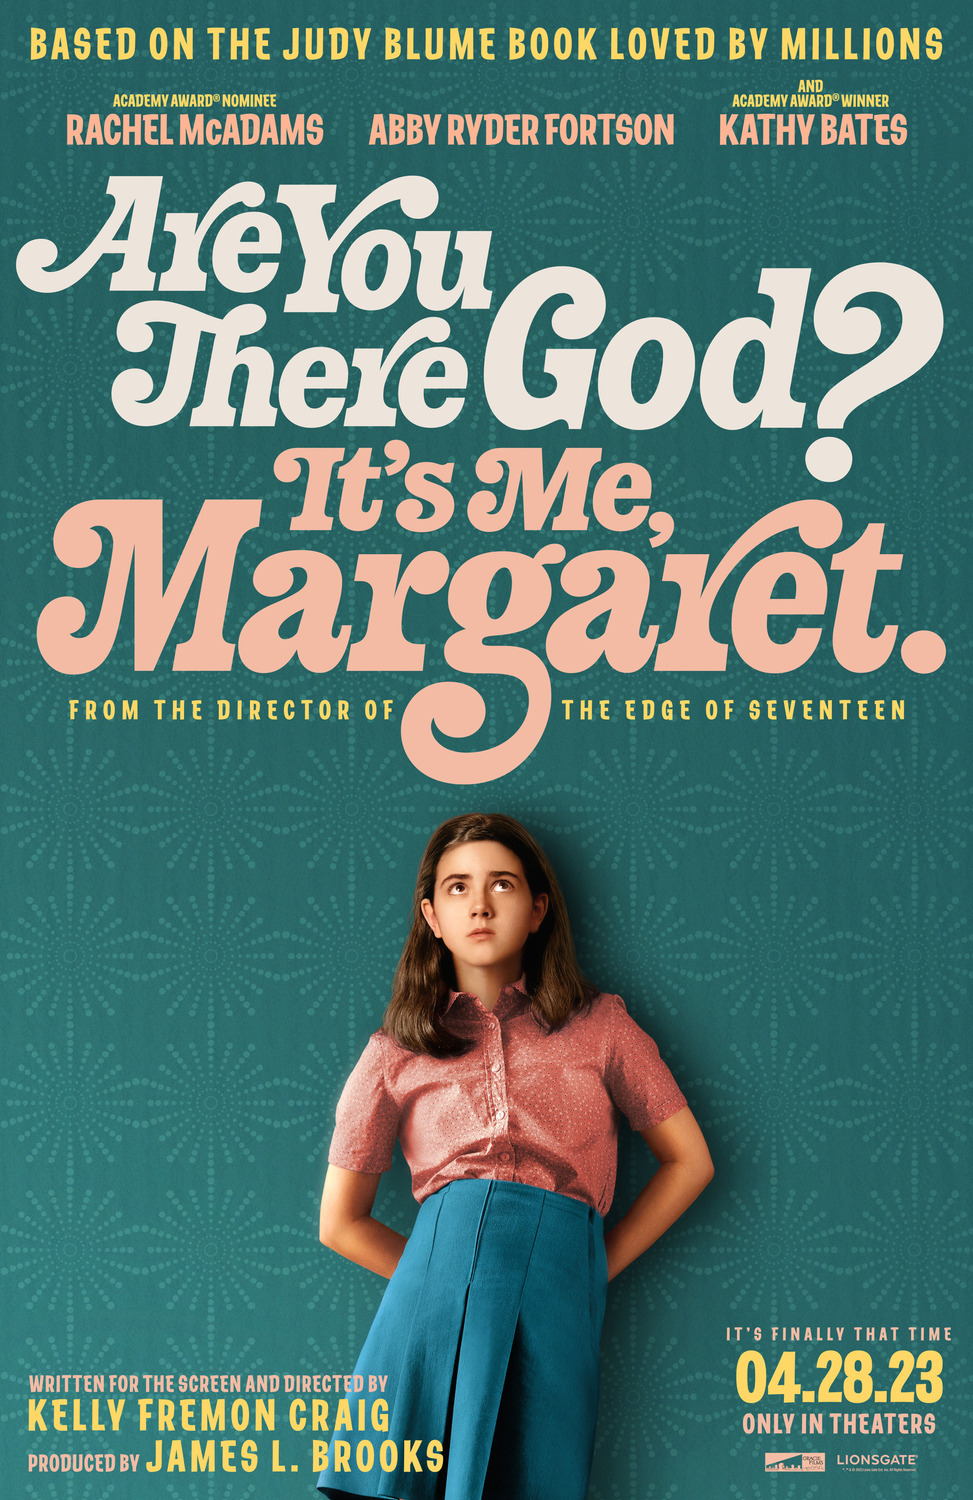 Are You There, God? It’s Me, Margaret.